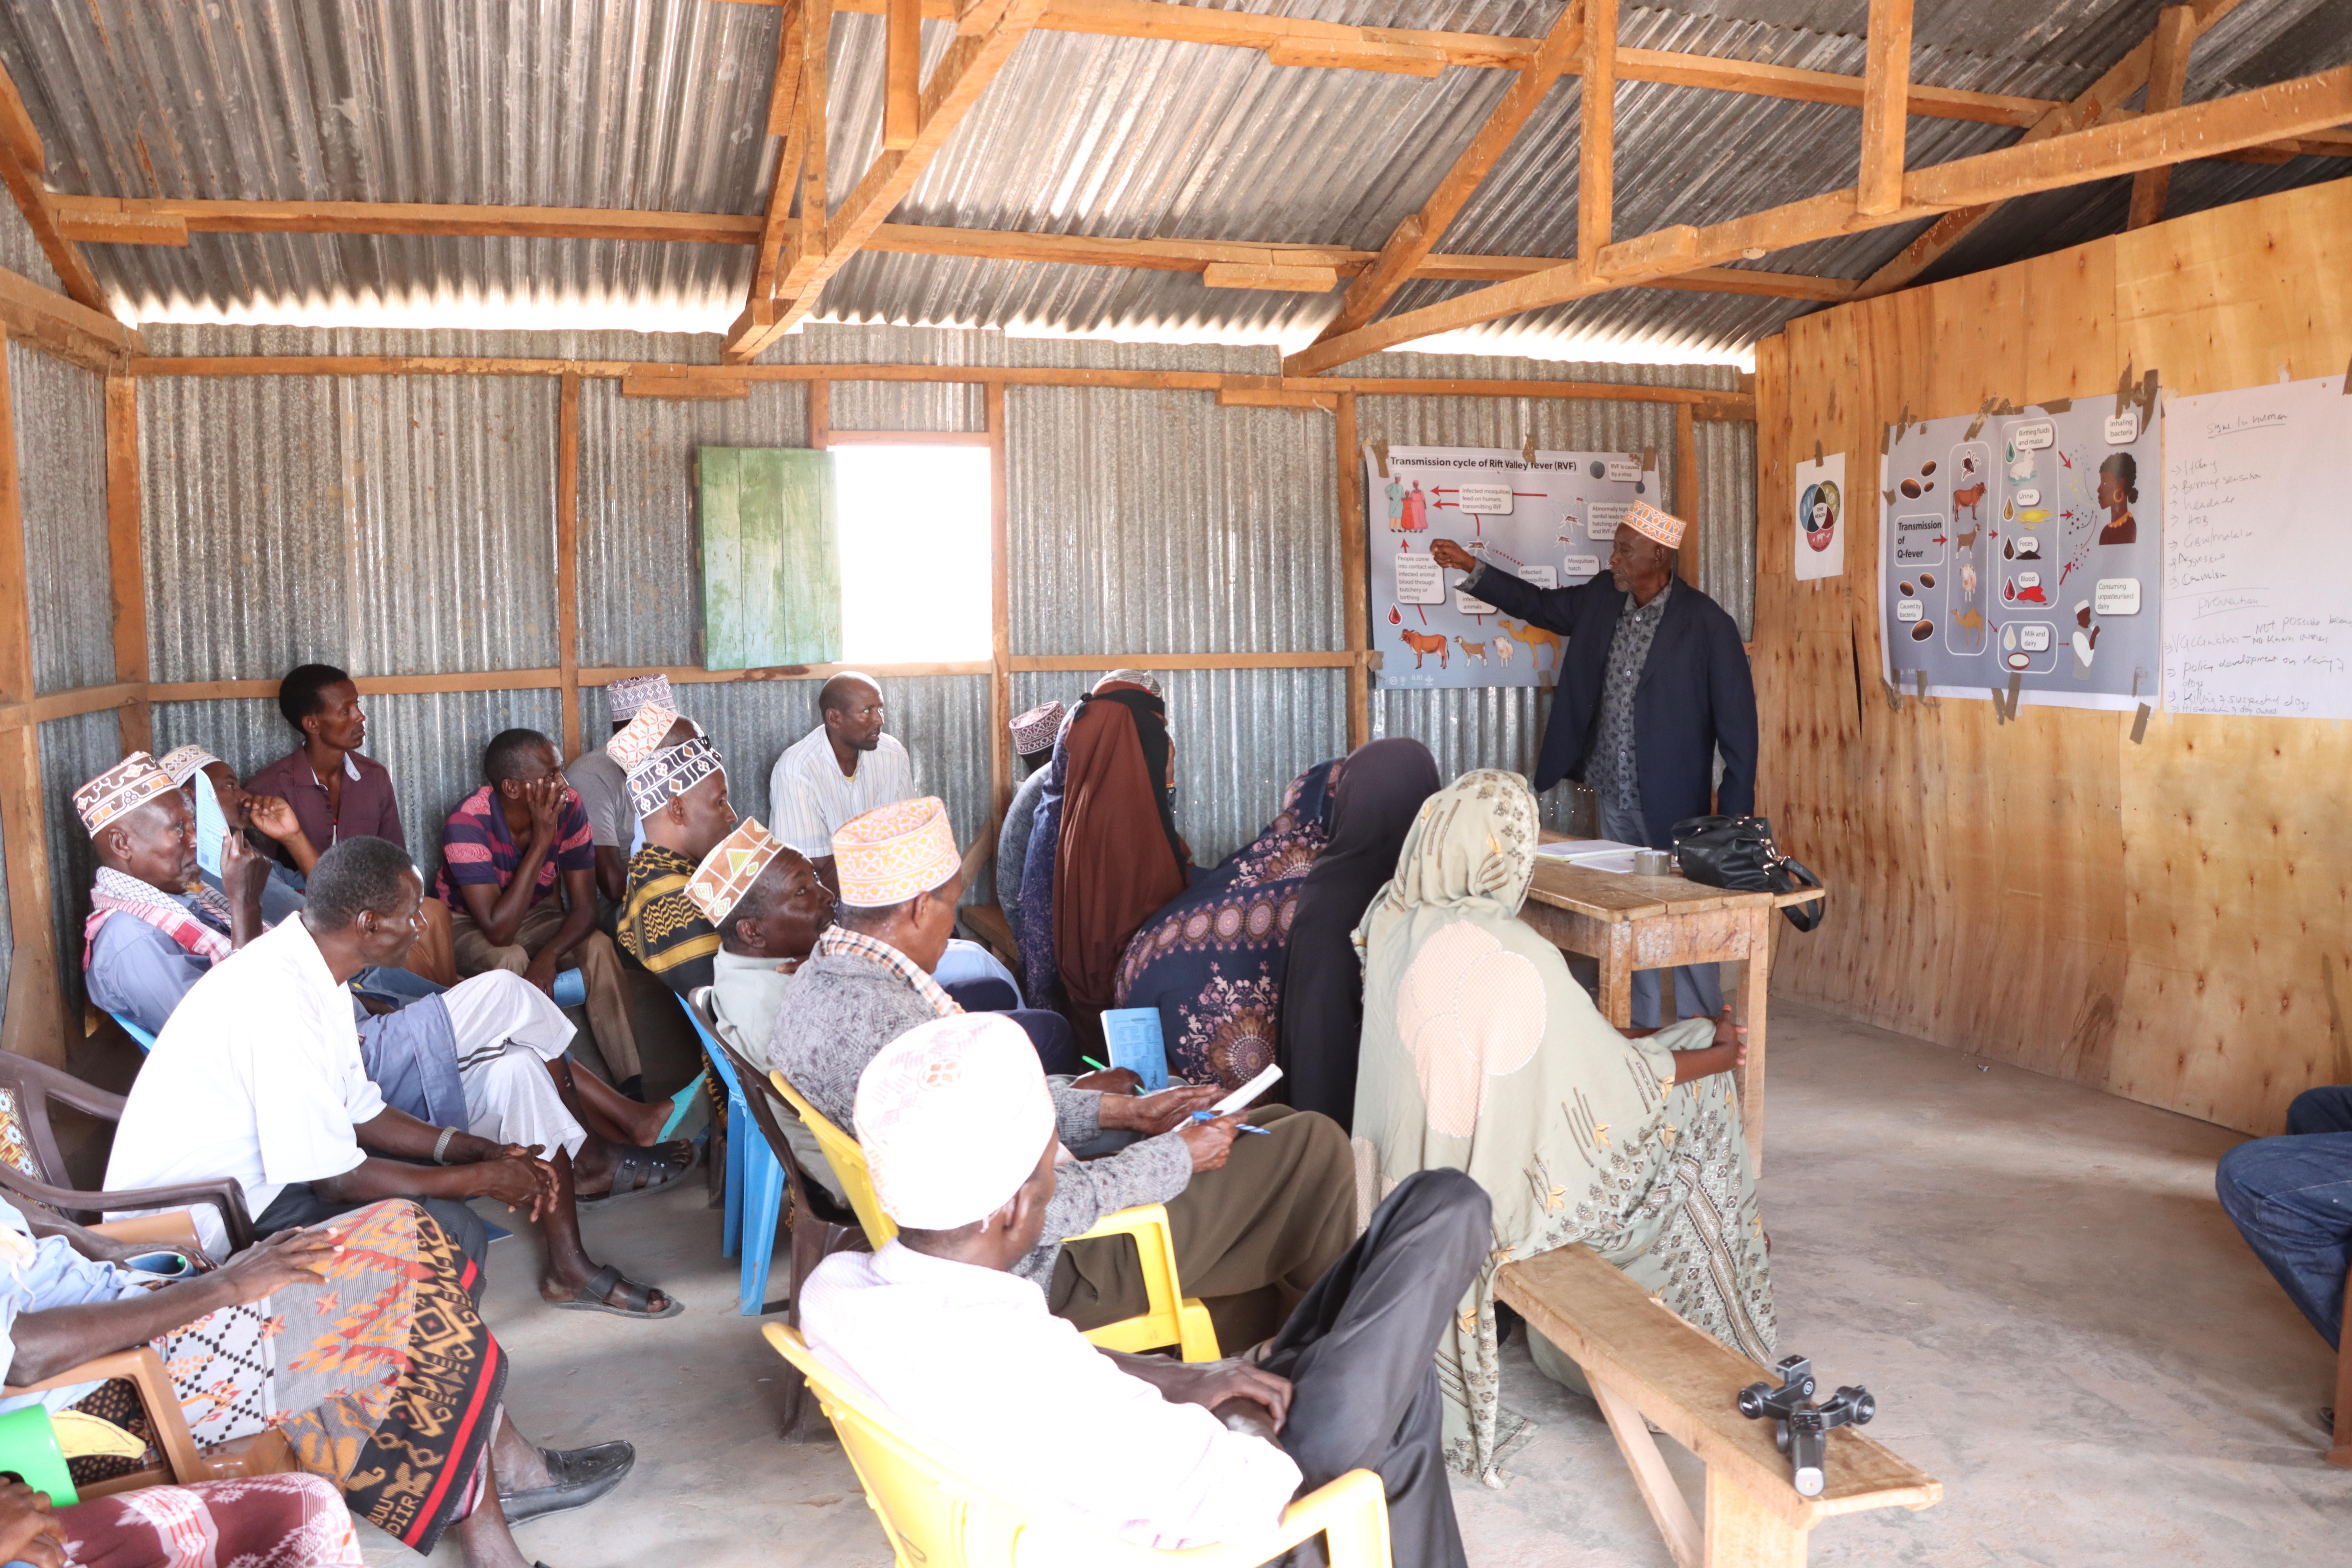 A One Health training session held in Isiolo County, Kenya